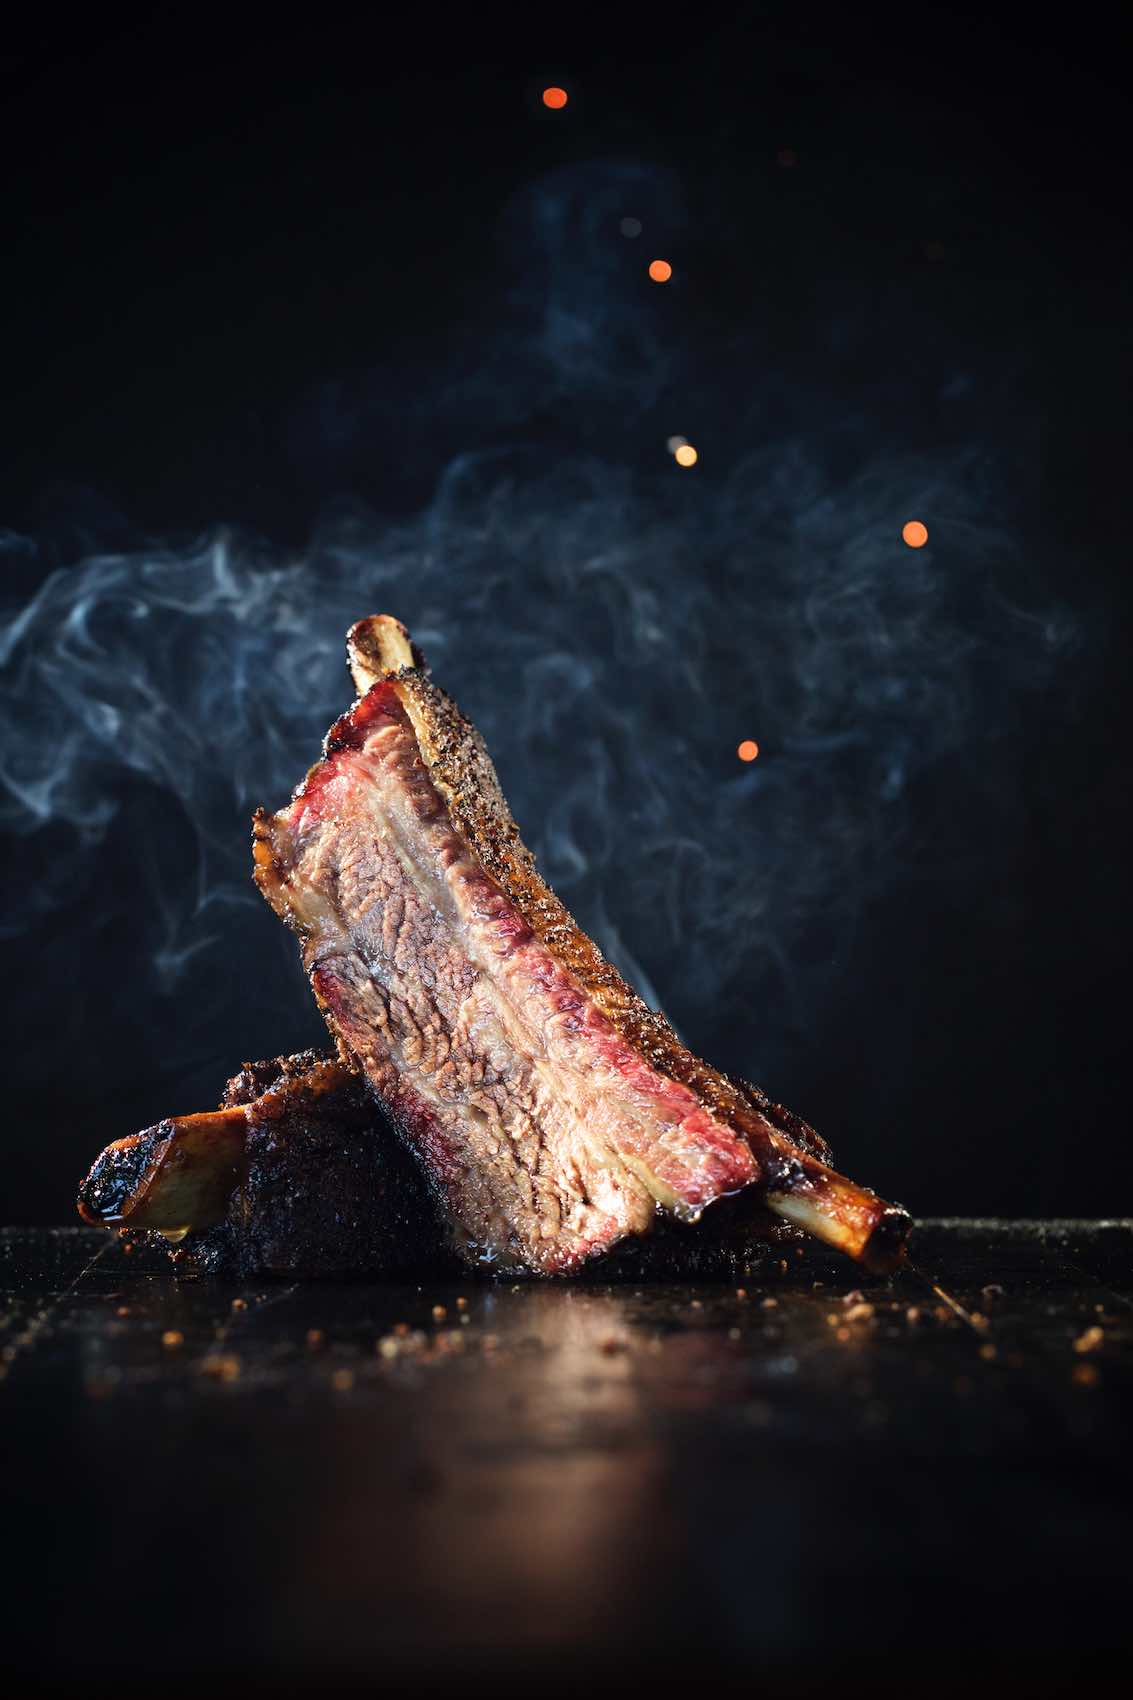 Jody Horton Photography - Steaming barbecue ribs on black table.